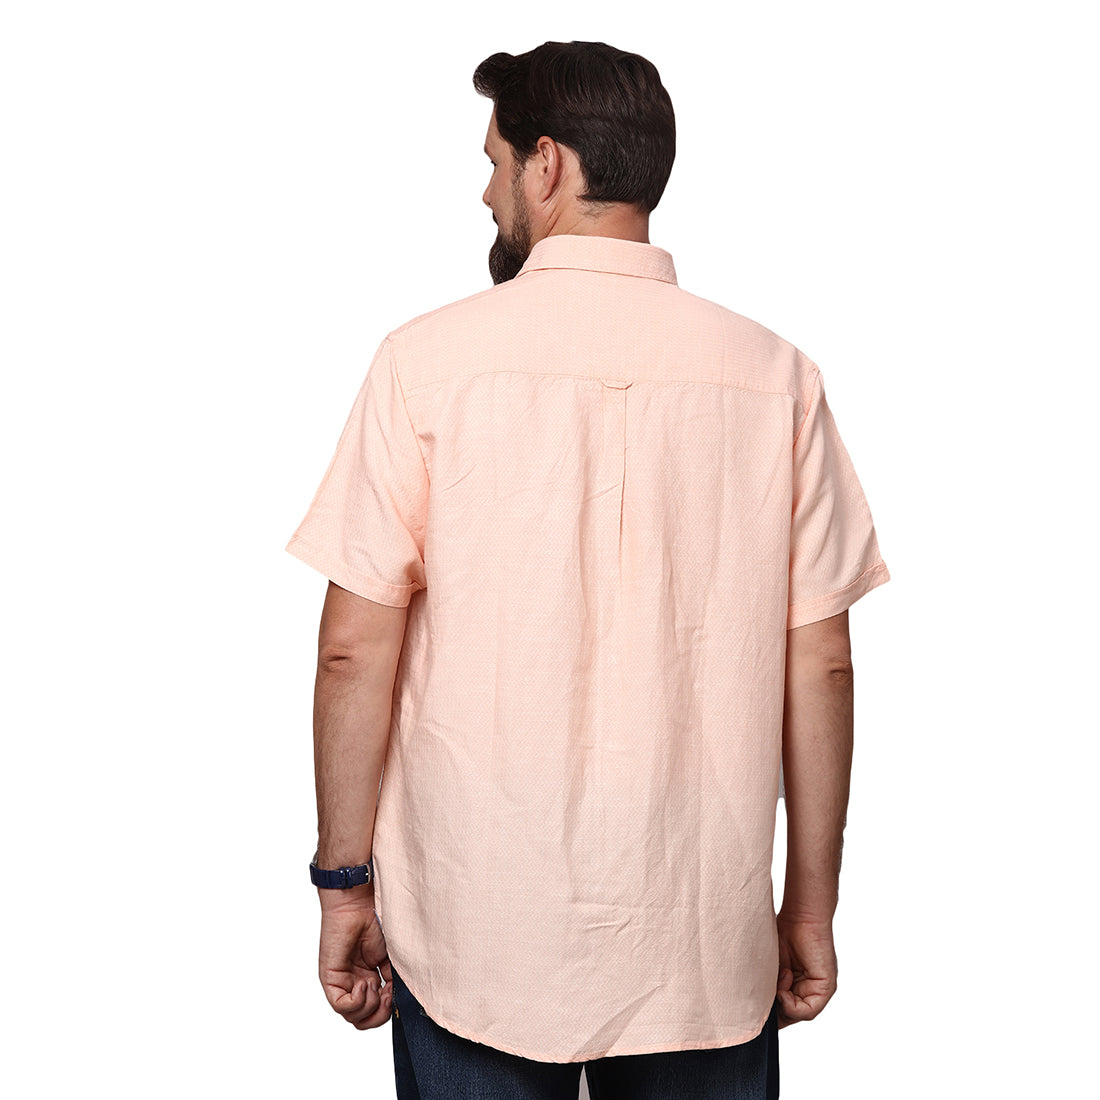 Big & Bold Solid Peach Half Sleeves Slim Fit Casual Shirts (Plus Size) - Double Two